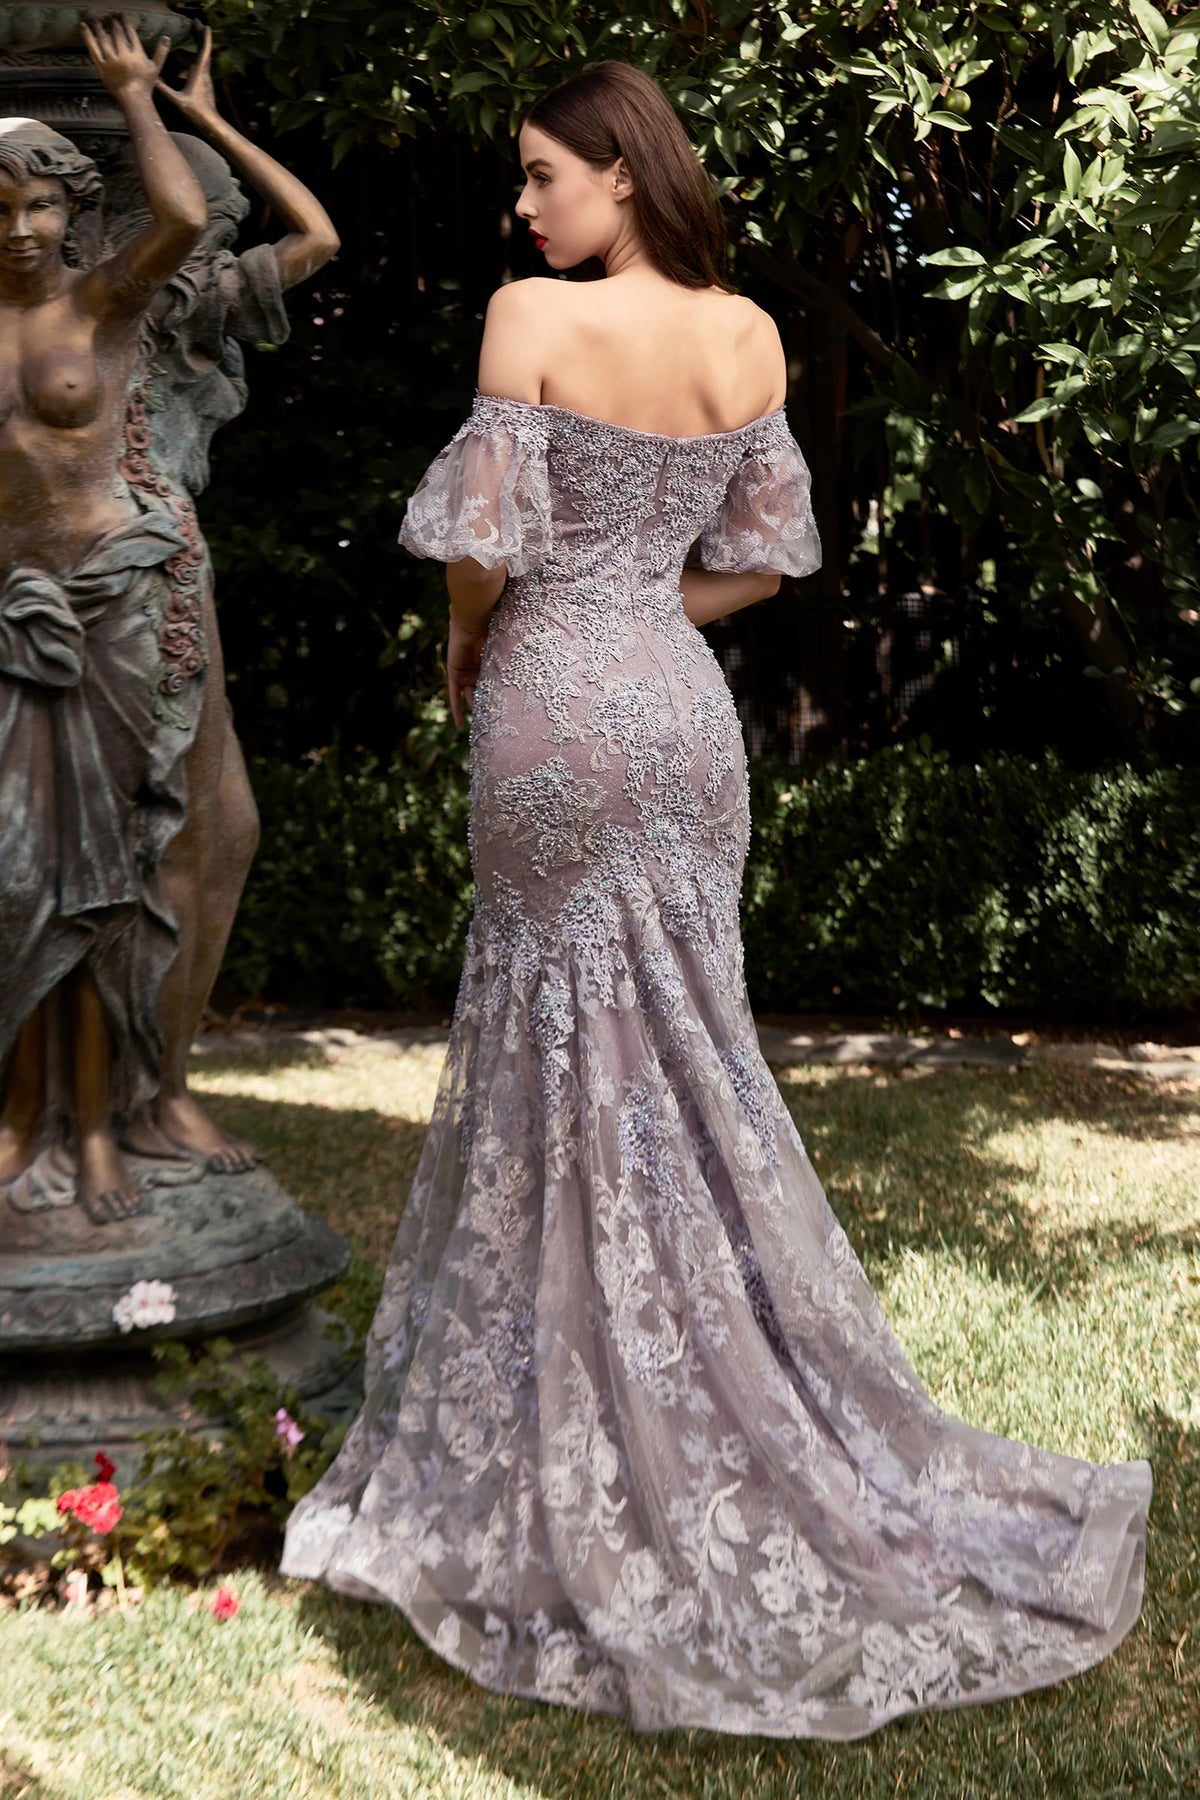 LaDivine CD959 Enchanting Lace Off-the-Shoulder Mermaid Gown, featuring a fitted silhouette, off-the-shoulder neckline, puff sleeves, and intricate lace detailing from head to toe. Perfect for elegant evening occasions.  This is a back view of the dress in color Violet.